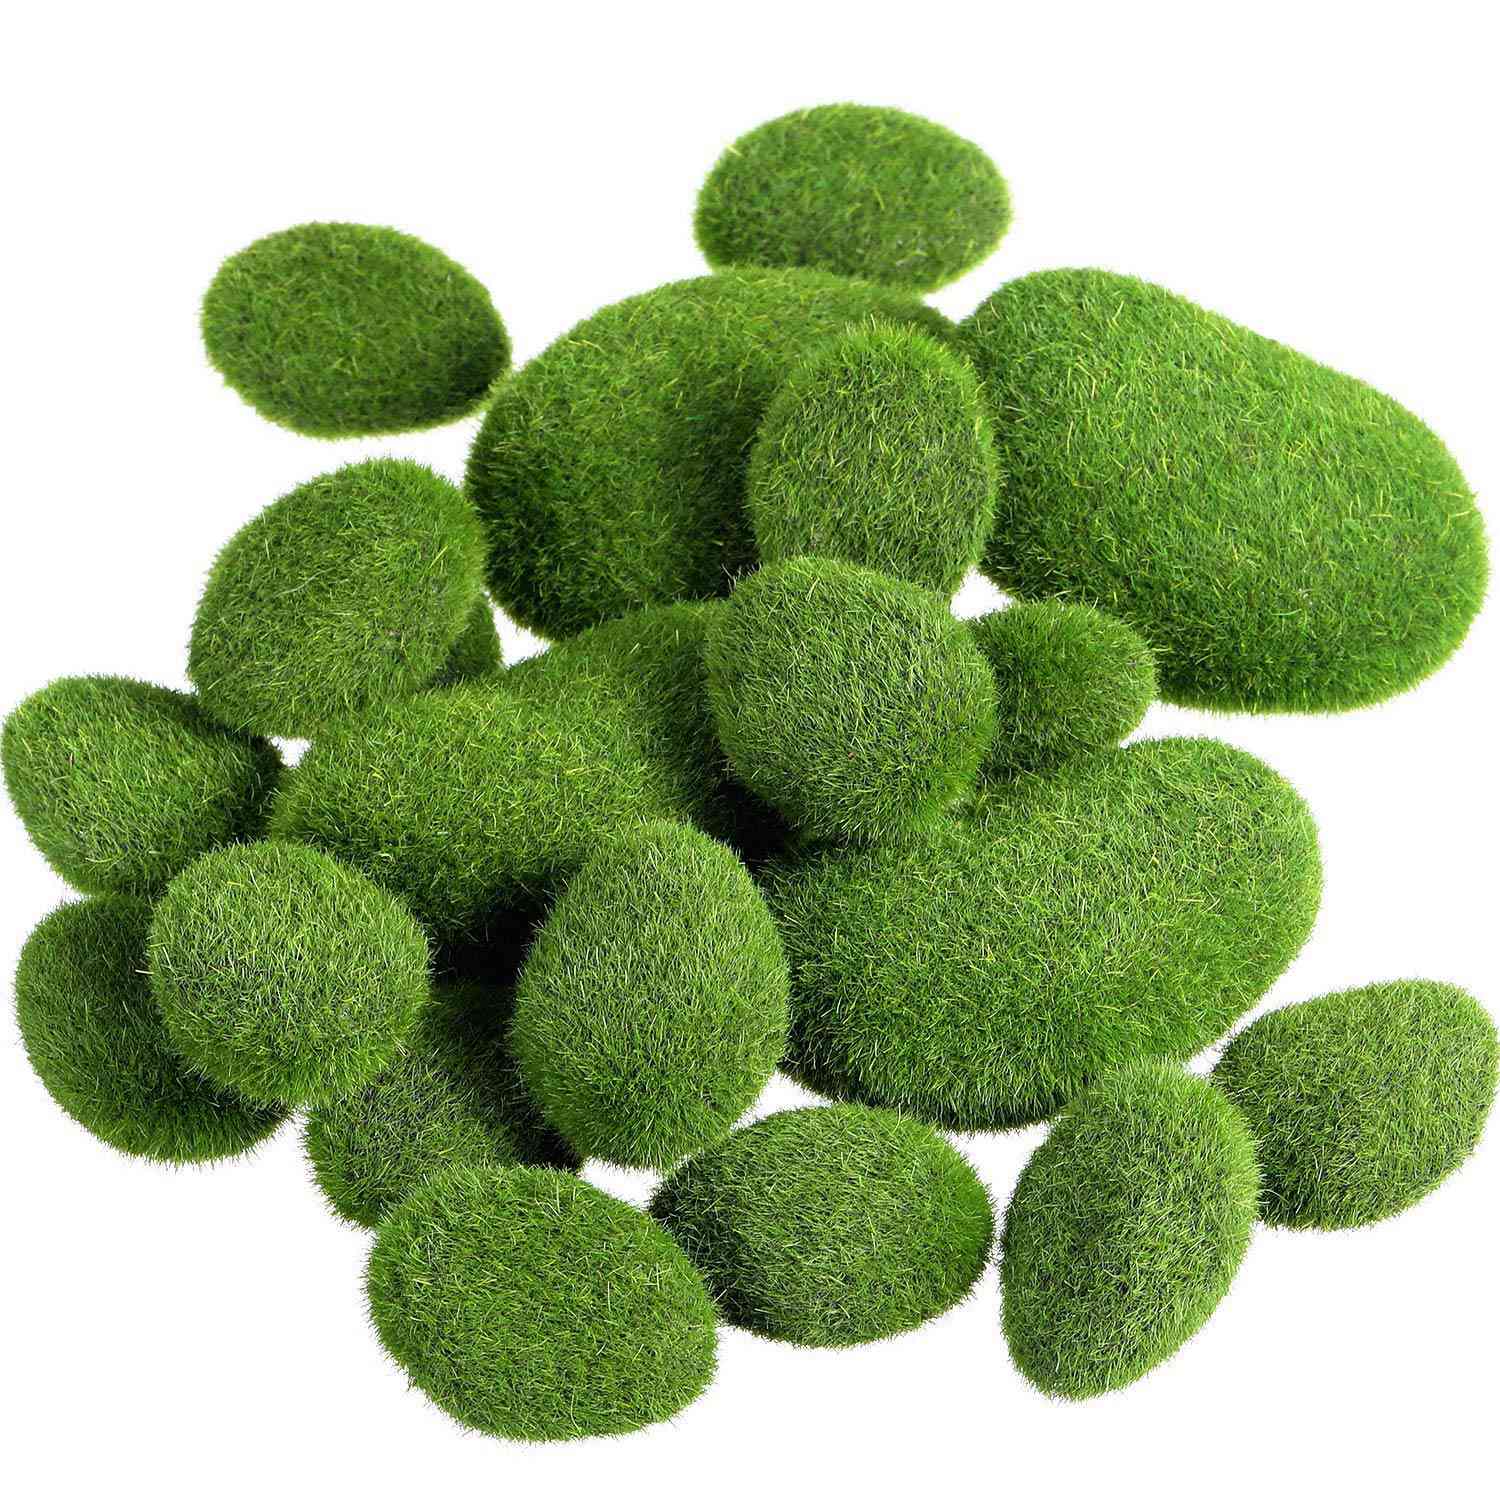 20 Pieces 2 Sizes Artificial Moss Rocks Decorative Faux Green Moss Covered Stones